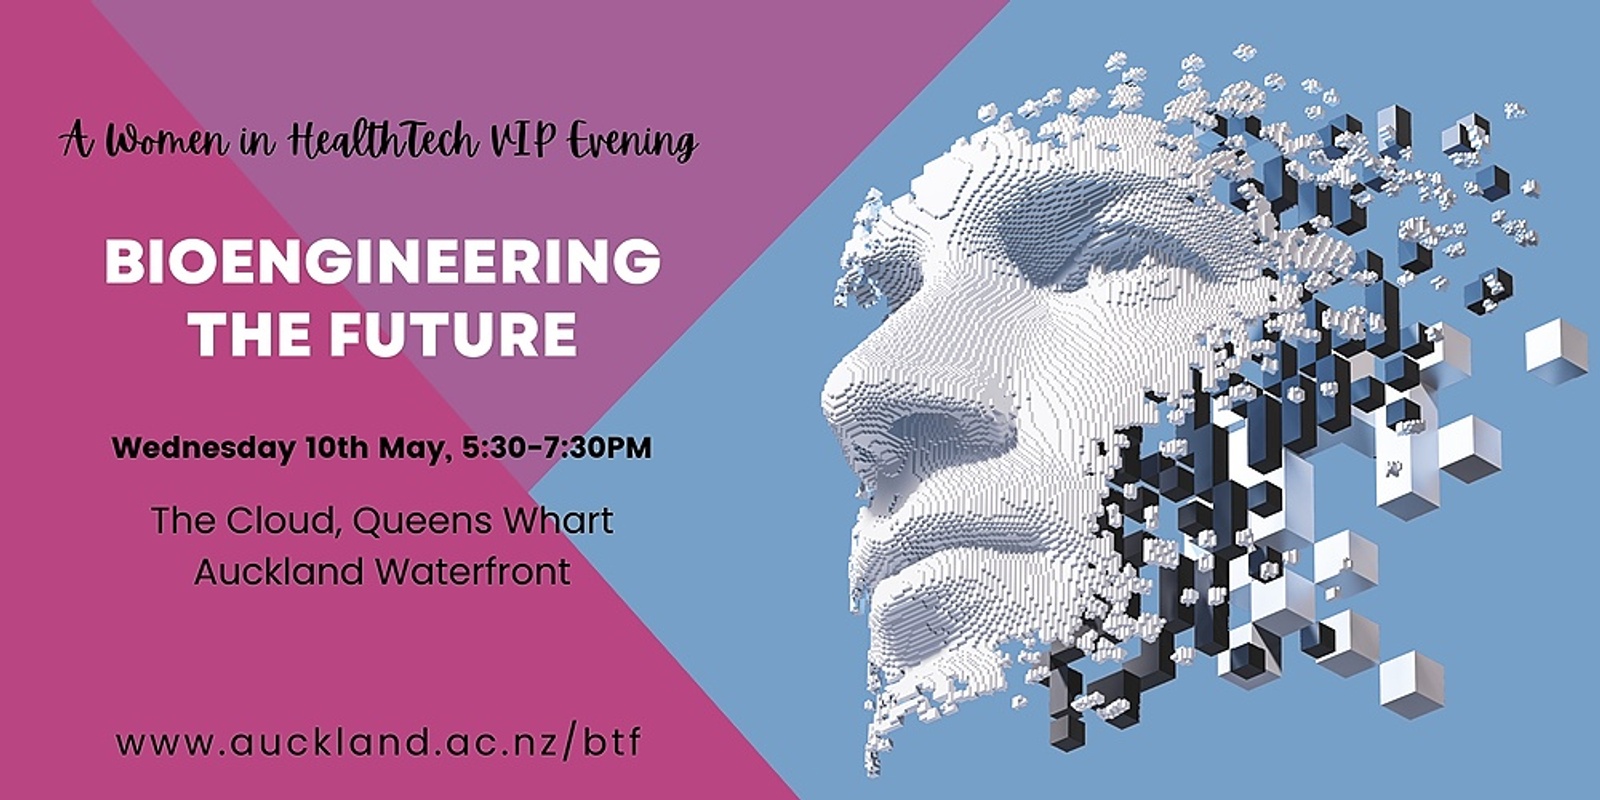 Banner image for WiHT VIP Networking Event: Bioengineering the Future